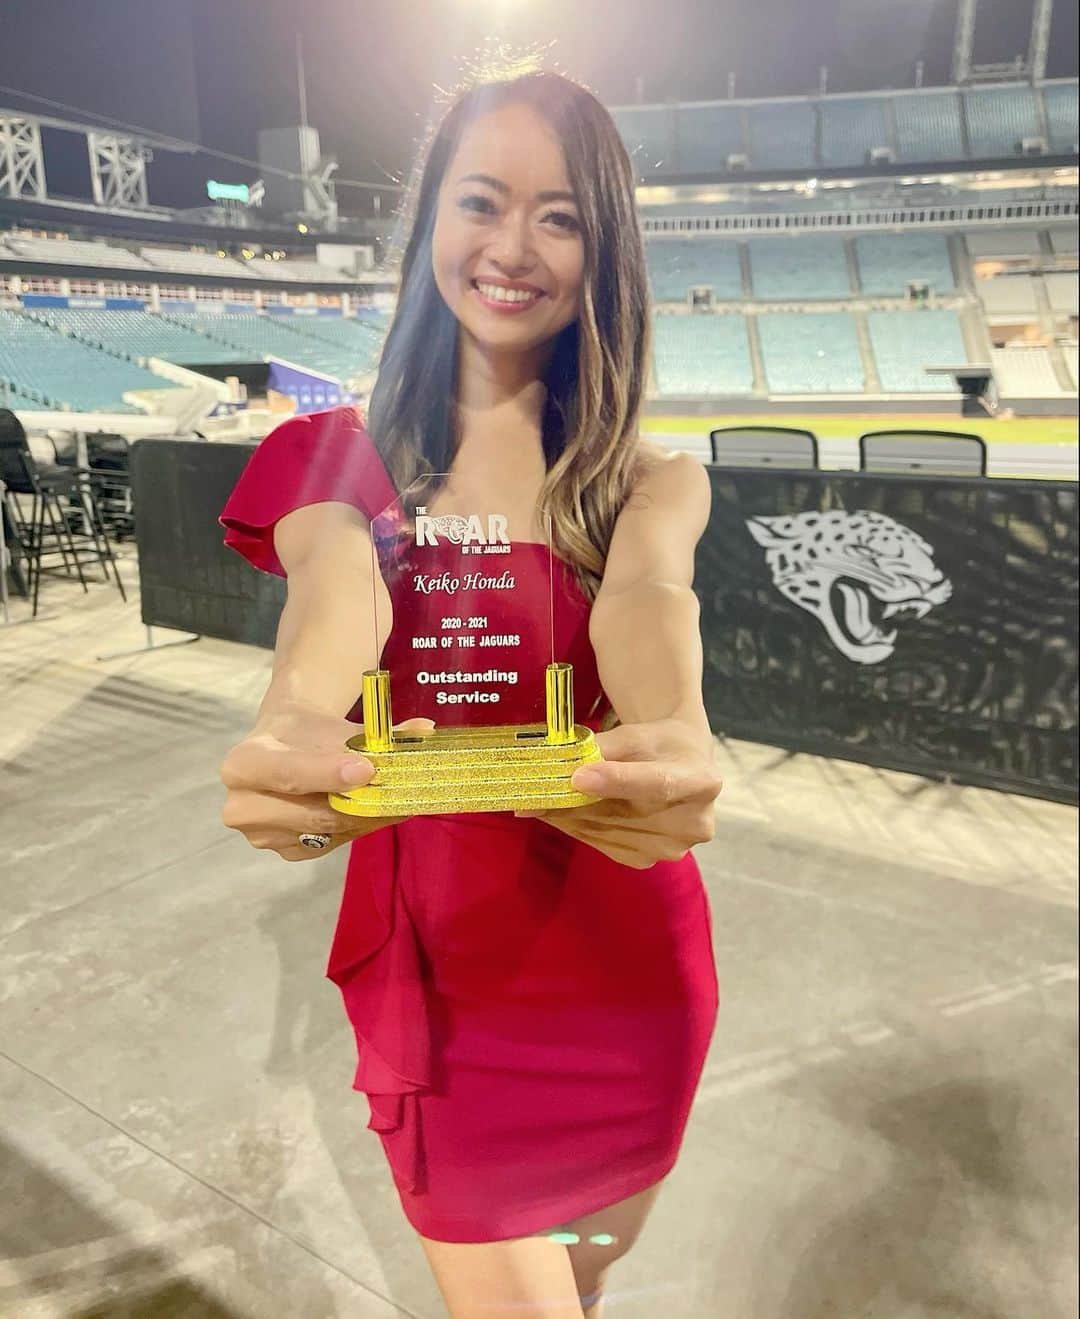 本田景子さんのインスタグラム写真 - (本田景子Instagram)「Blessed to have been able to receive outstanding service award🥺✨ This year... we couldn't get much communication with our fans, so I tried to go as many appearances as possible. That's why this award is so meaningful for me!!  I appreciate the Jaguars organization, director, and beautiful teammates❤️ Every moments was precious for me💎 Thank you so much to everyone for supporting me this year as well!! Love y'all❤️❤️ . . Banquetが終わり、今シーズン全ての行事を終えました！ 今年はアウトスタンディングサービスという賞を受賞しました！ これは積極的に多くのアピアランスに参加しチームに貢献したことを意味する賞です。 ファンとの交流が少ないシーズンで、出来るだけアピアランスに参加するよう試みたので、この賞を受賞出来てとても嬉しいです😍🥺✨ 応援してくれる家族、友人、ジャクソンビルの方々、日本のみなさま、いつも温かい応援を本当にありがとうございます‼️ 引き続き心強く頑張りますので、宜しくお願いします😊❤️ . . #jacksonville #florida #Jags #jaguars #gojags #roar #theroarofthejaguars #theroar #nfl #cheer #cheerleader #nflcheerleaders #america #americandream #duval #duuuval #チア #アメリカ生活 #チアリーダー #夢 #挑戦 #意志あるところに道は開ける #challenge #chance #banquet #outstandingservice」4月8日 11時05分 - keikohonda1111